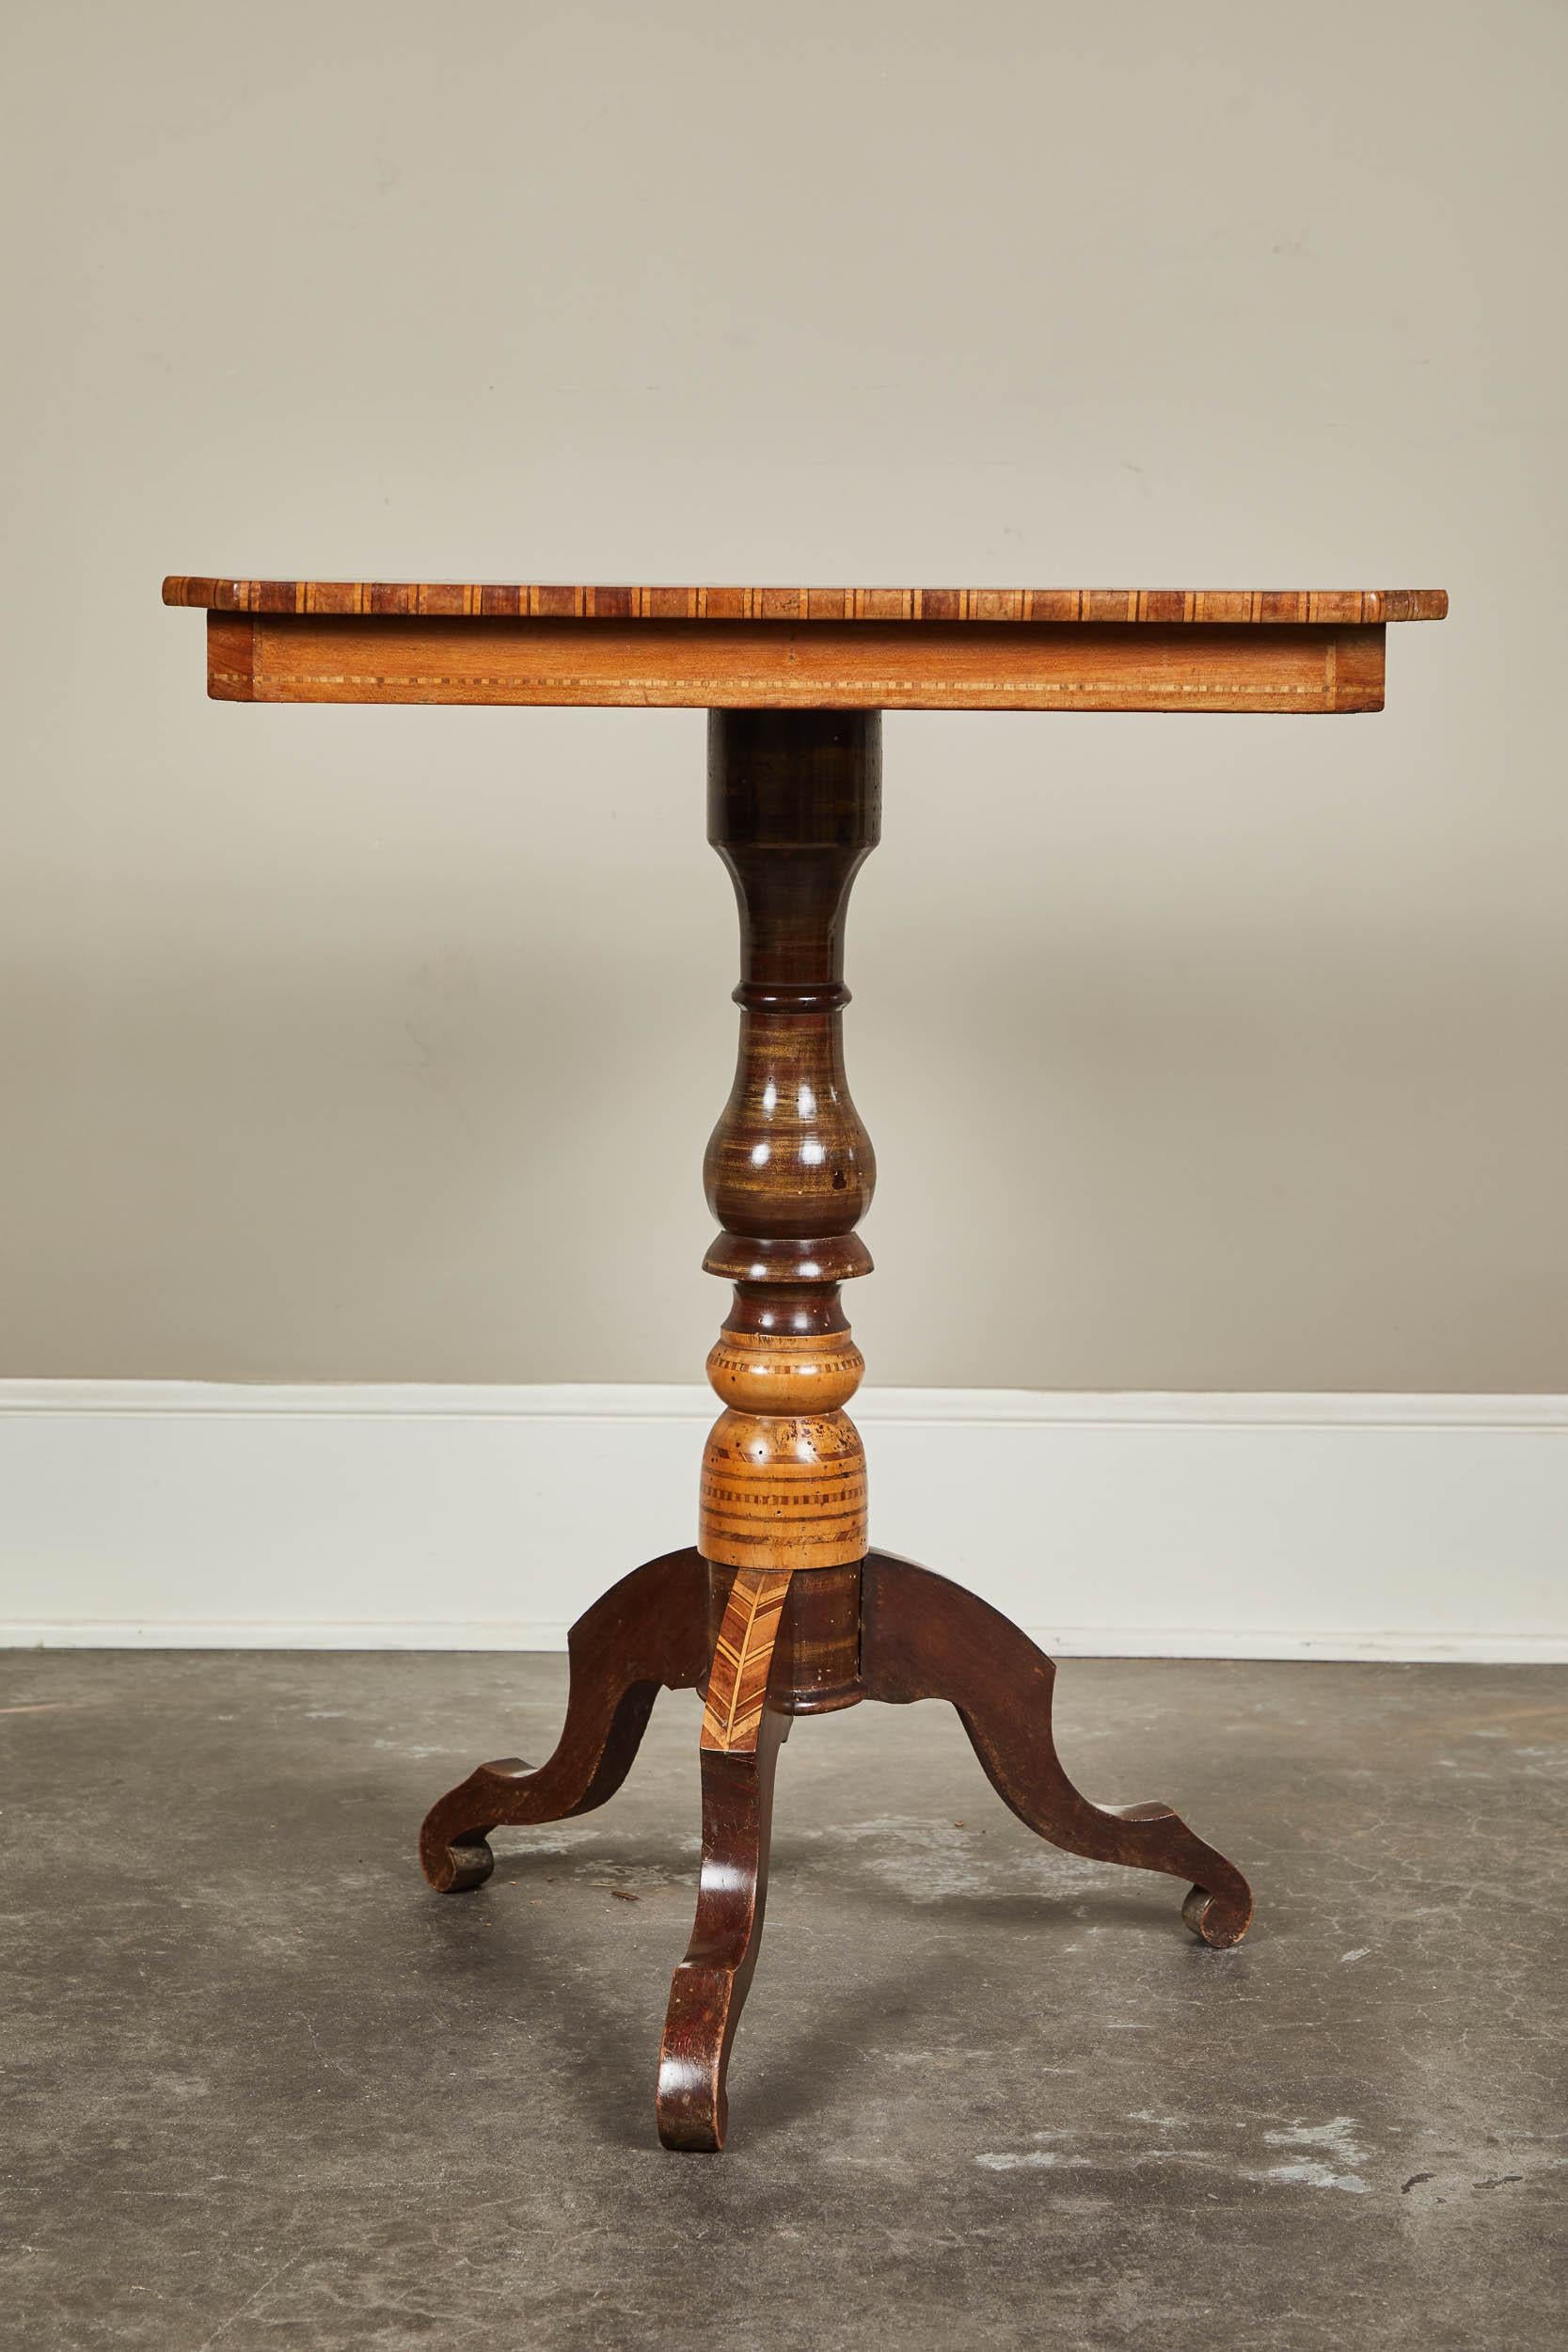 A 19th century inlay and parquetry chess table from Sorrento. Tripod pedestal with inlay detail on feet as well, square shaped top. Shown with chess set for scale, though not included.